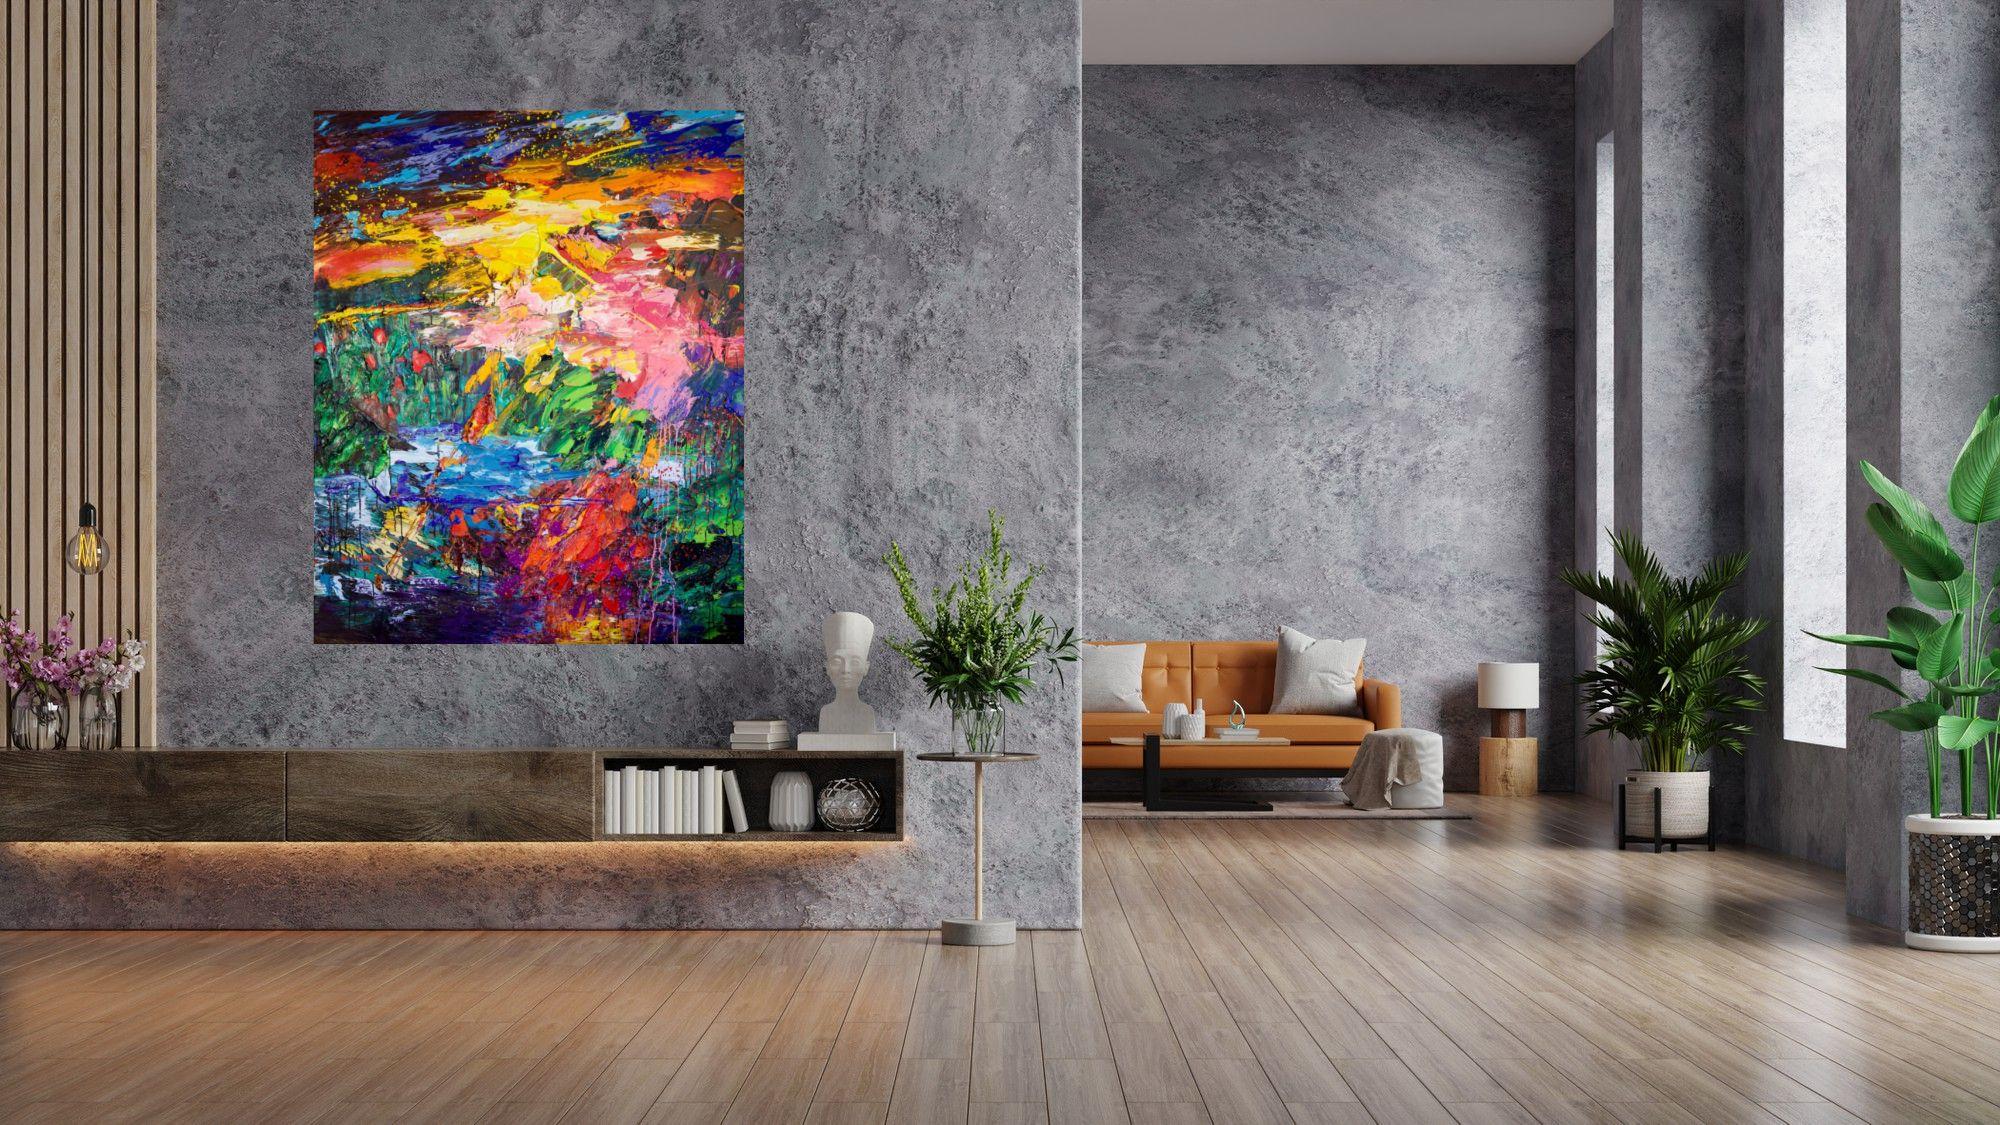 Voyage is an original work of art by the French artist Gérard Stricher.
The painting is powerful thanks to the work on colors and textured mastered by the artist.

Oil on canvas
162 x 130 cm cm without the frame
168 x 136 cm with the frame